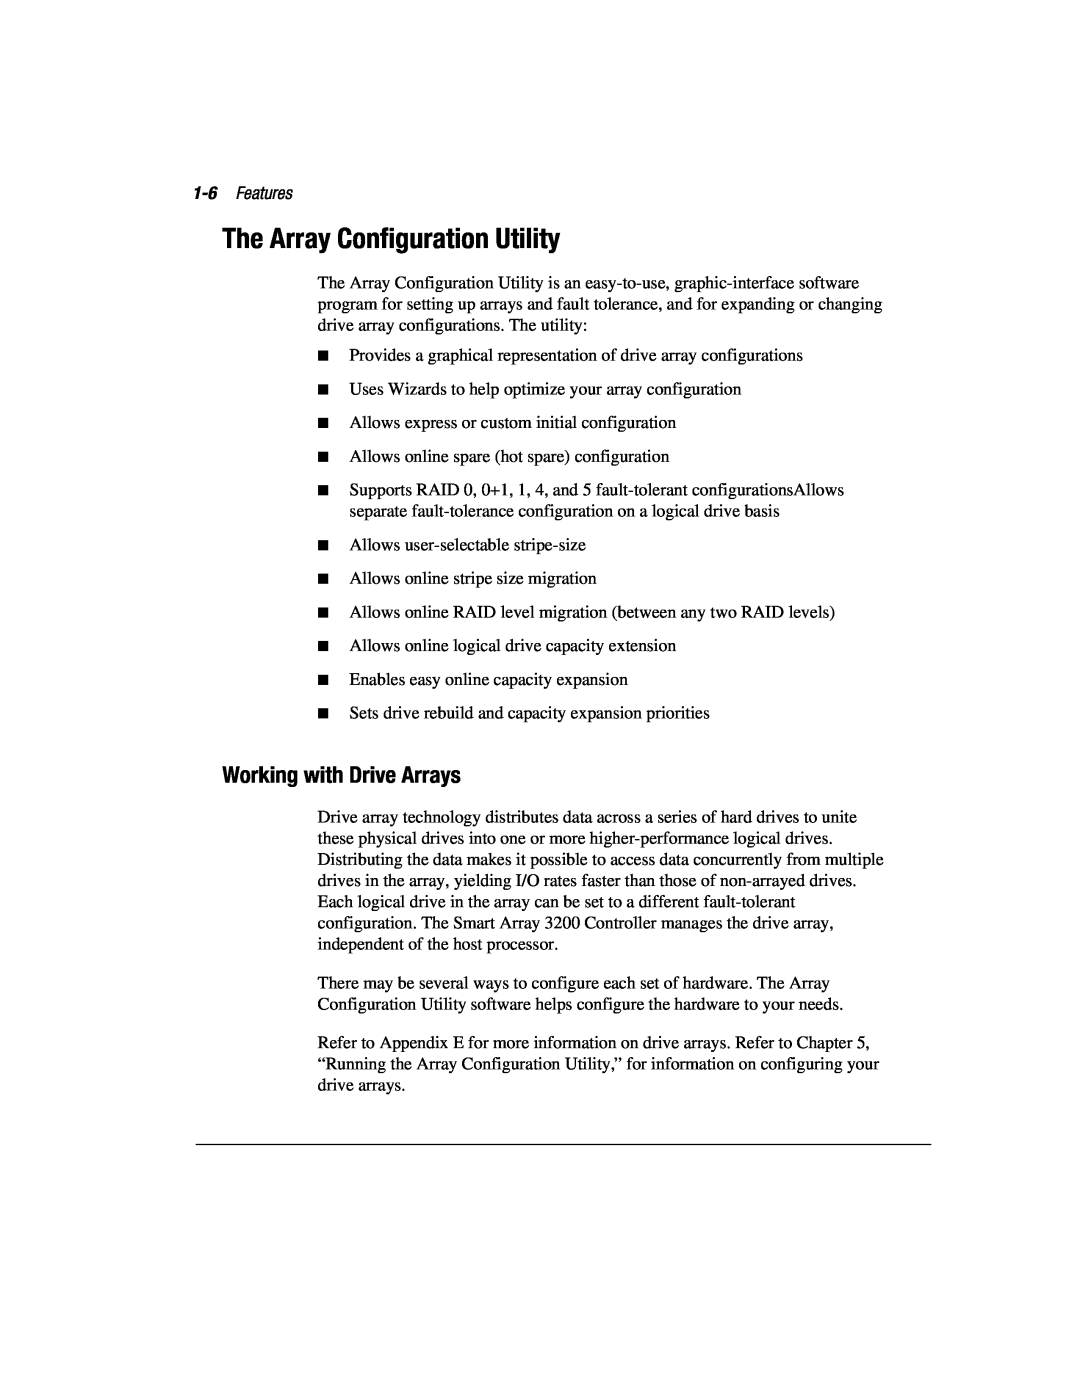 Compaq 3200 manual The Array Configuration Utility, Working with Drive Arrays, Features 